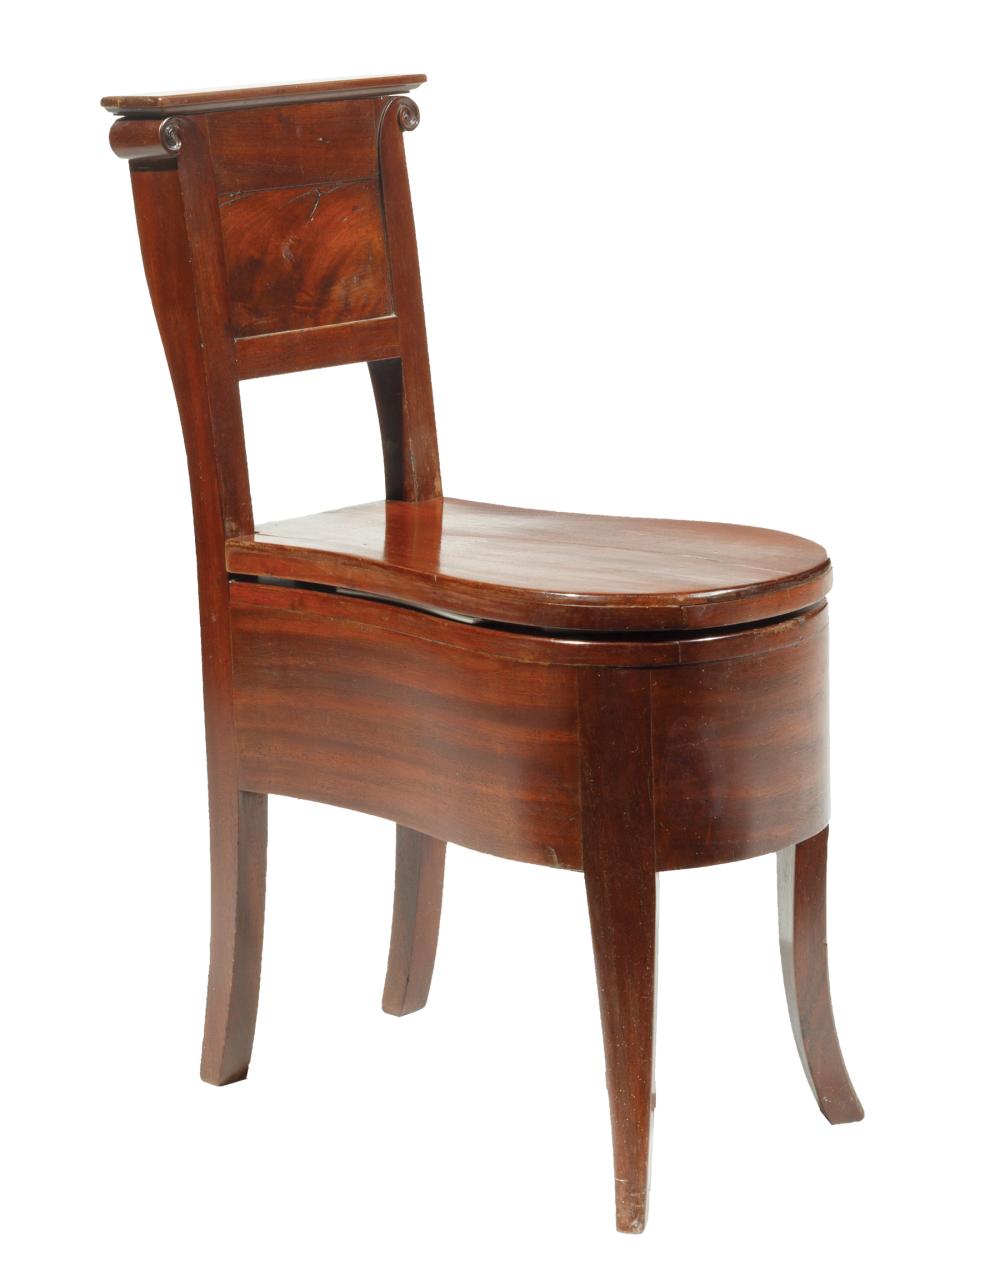 AMERICAN CLASSICAL CARVED MAHOGANY 31903c